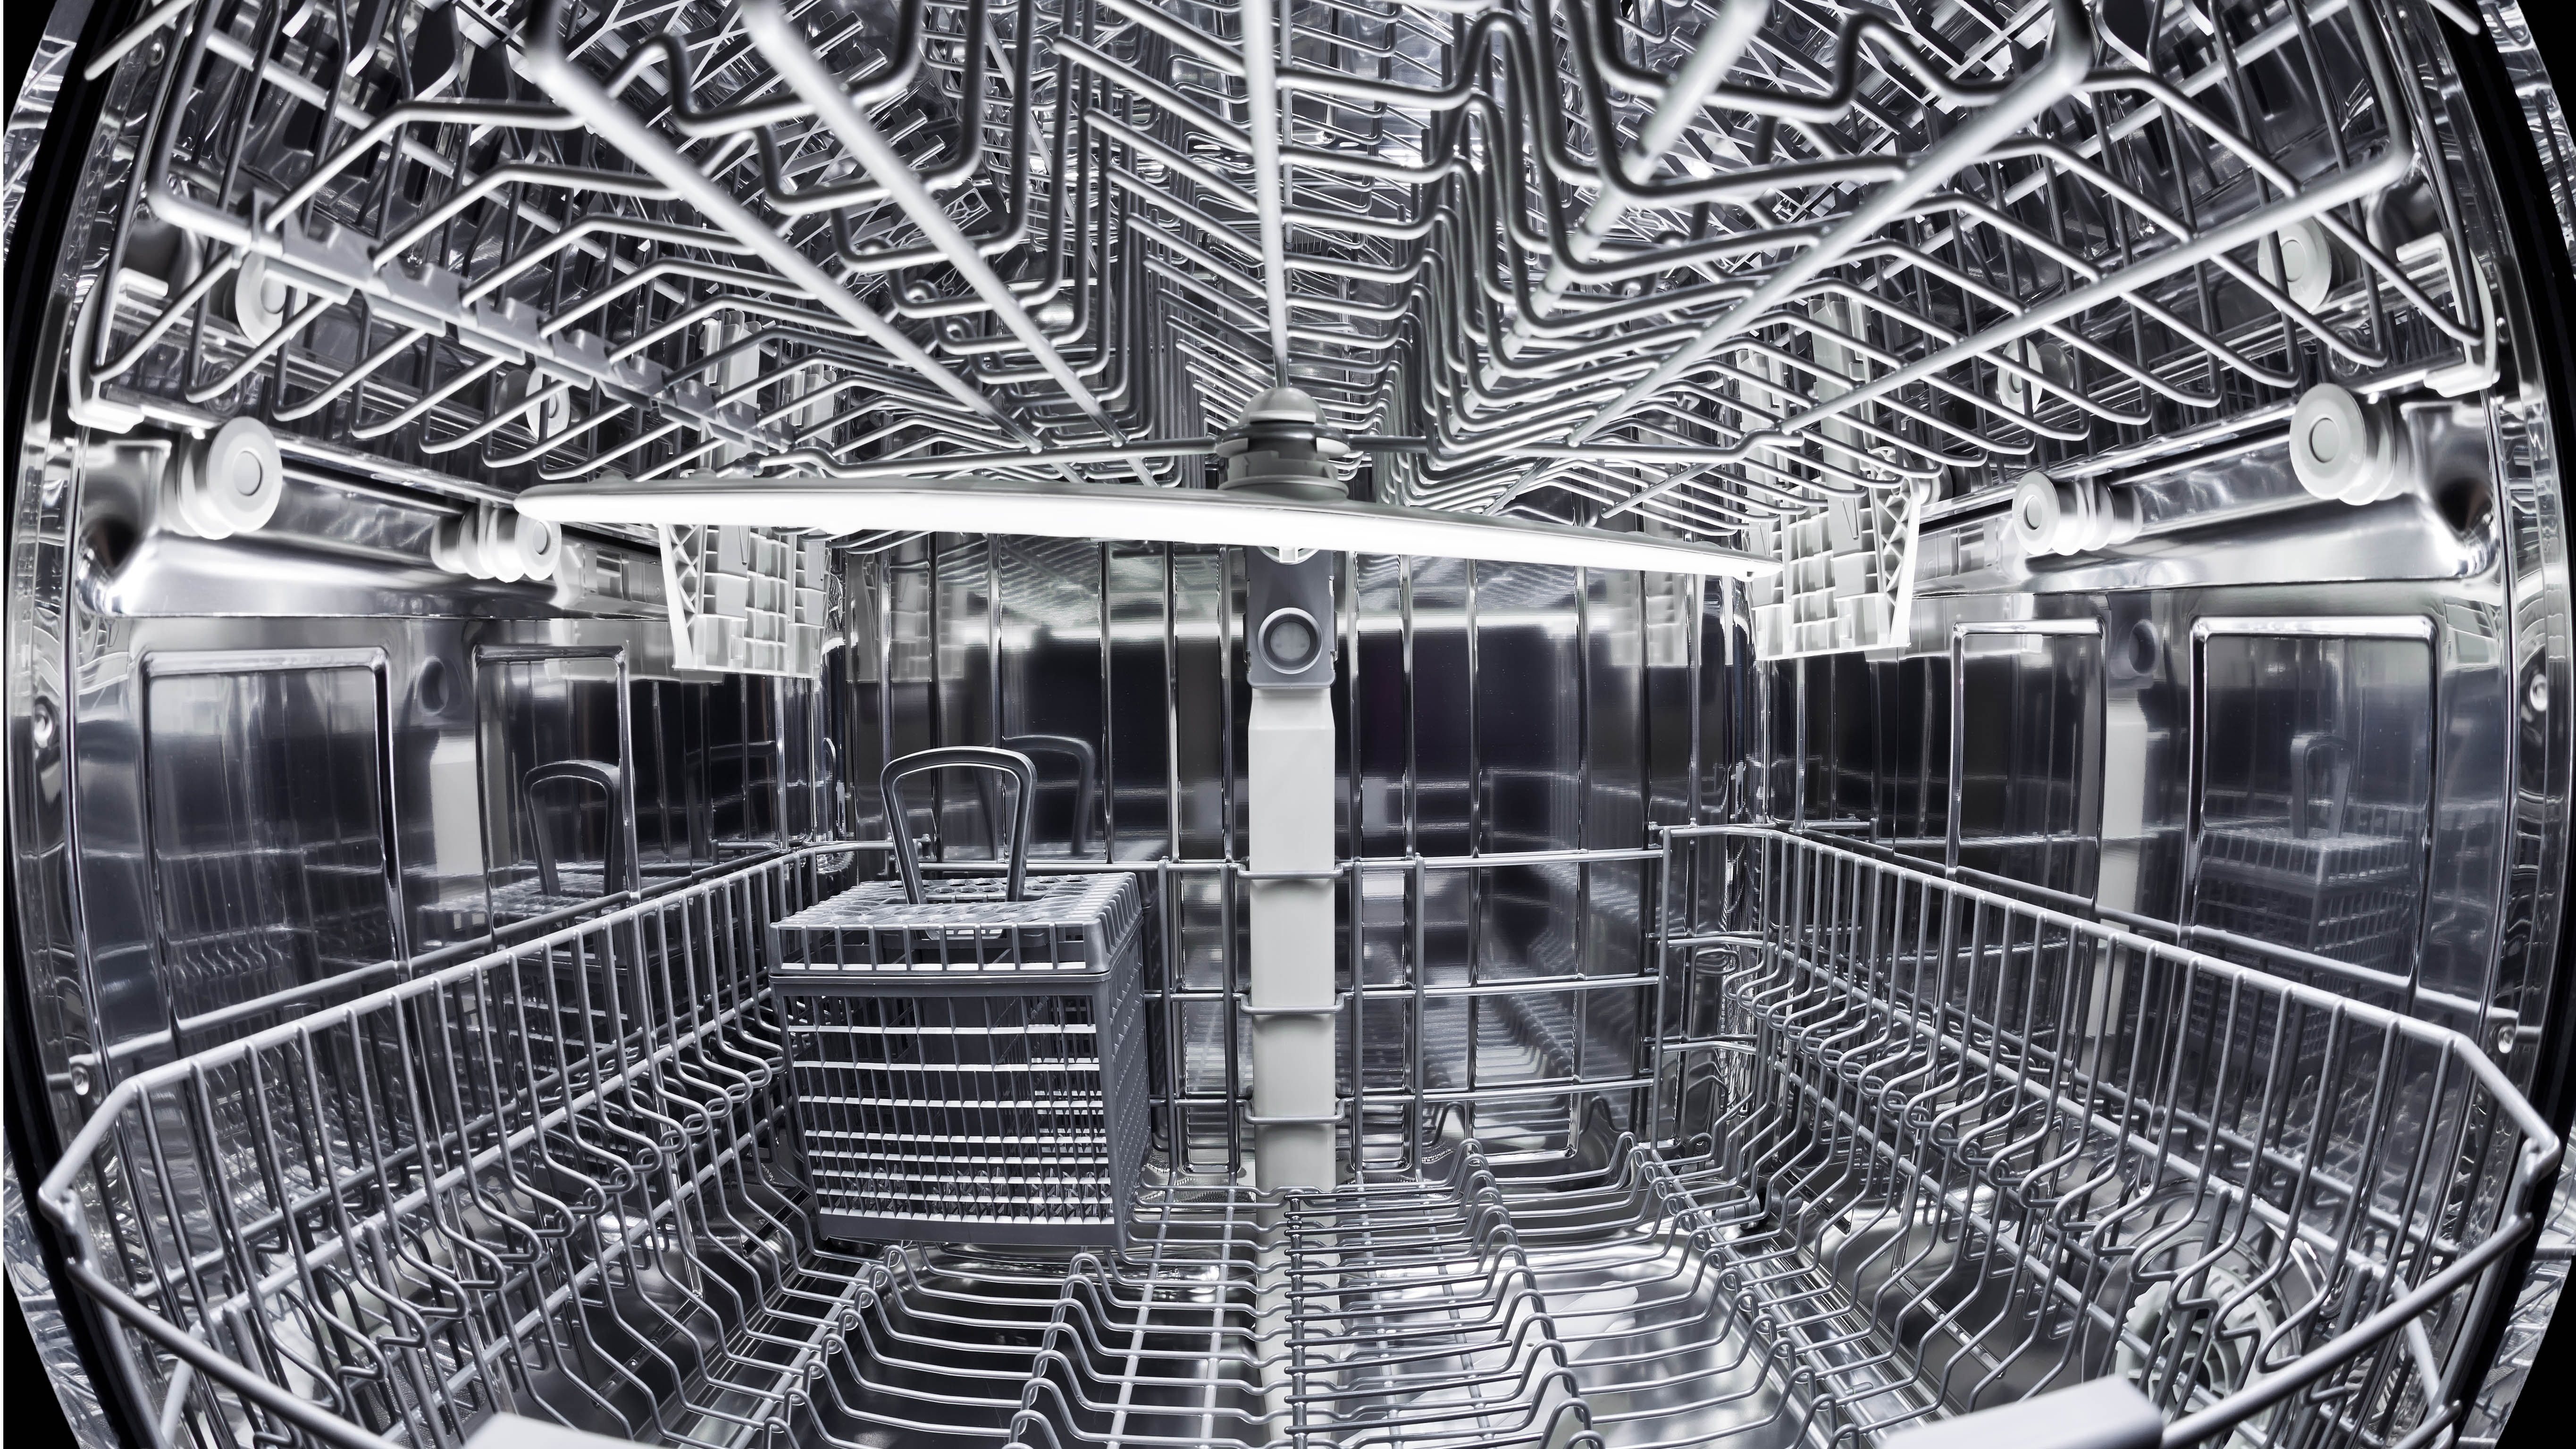 The inside of a dishwasher with upper and lower racks and a cutlery basket